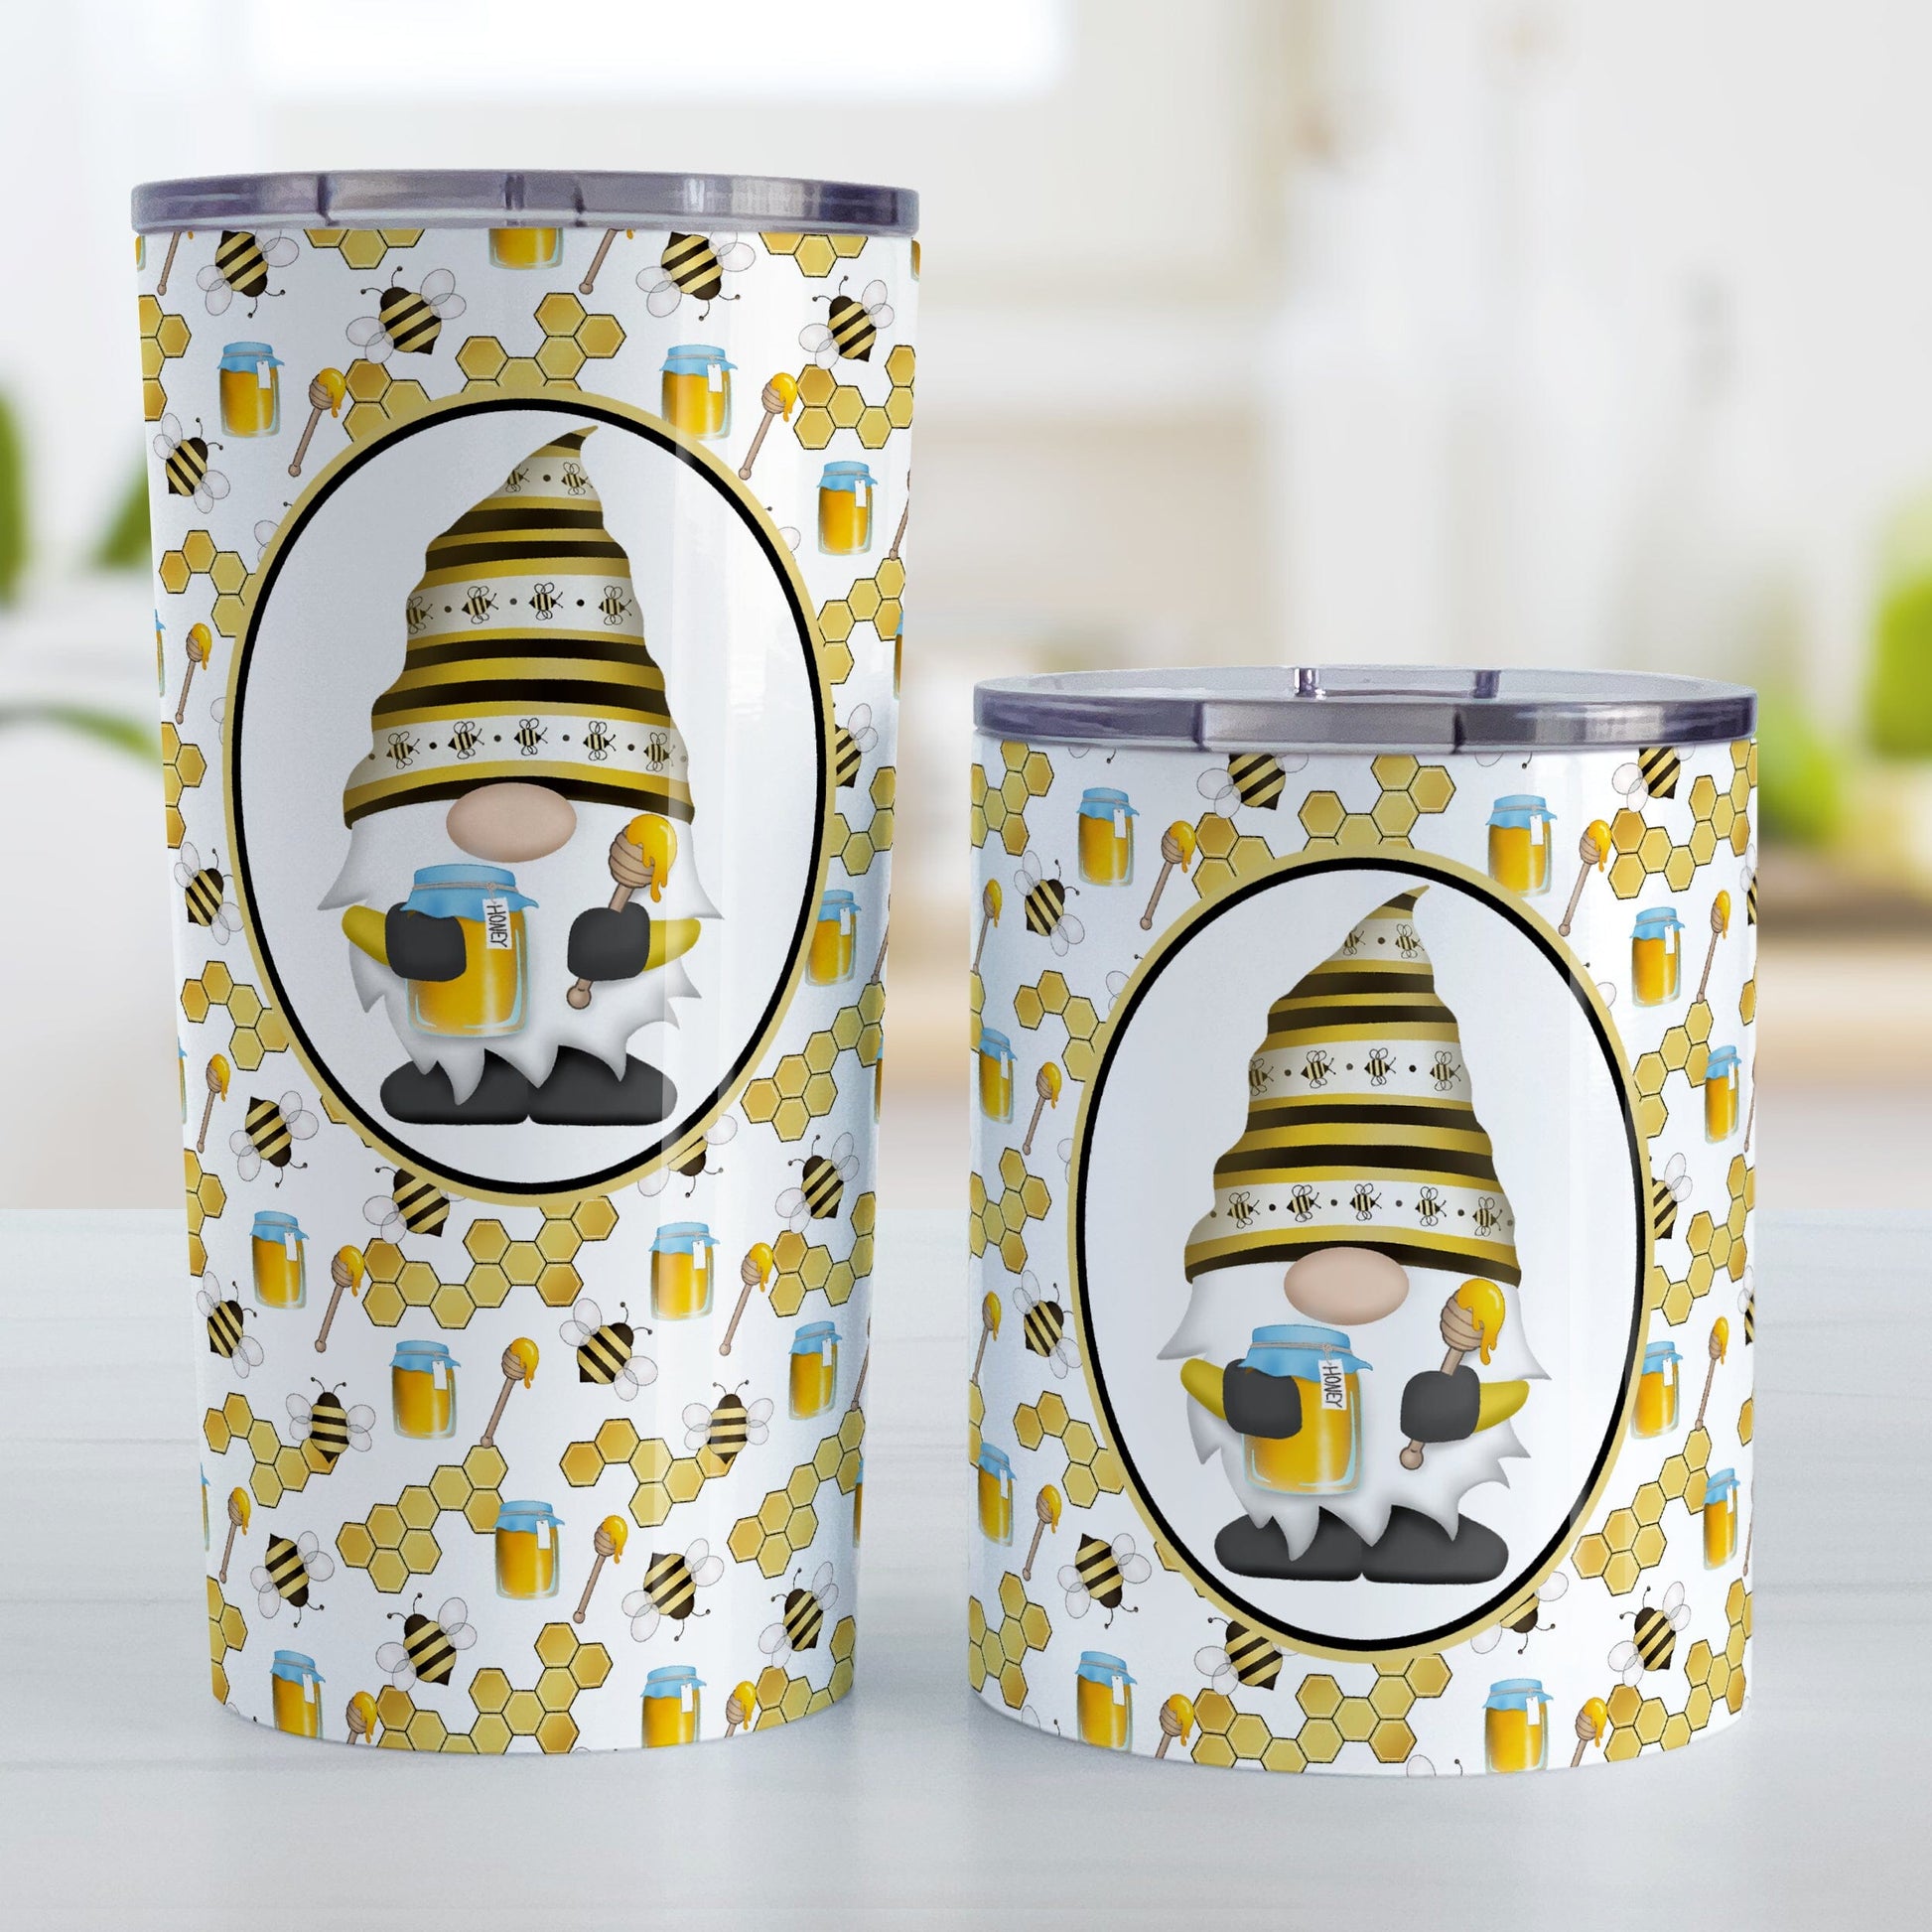 Yellow Gnome Honey Jar Bee Tumbler Cup (20oz or 10oz) at Amy's Coffee Mugs. Stainless steel tumbler cups designed with an adorable gnome wearing a yellow bee-themed hat and holding a honey jar and honey dipper in a white oval over a pattern background that wrap around the cups with bees, honey jars, honey dippers, and honeycomb. Photo shows both sized cups on a table next to each other.